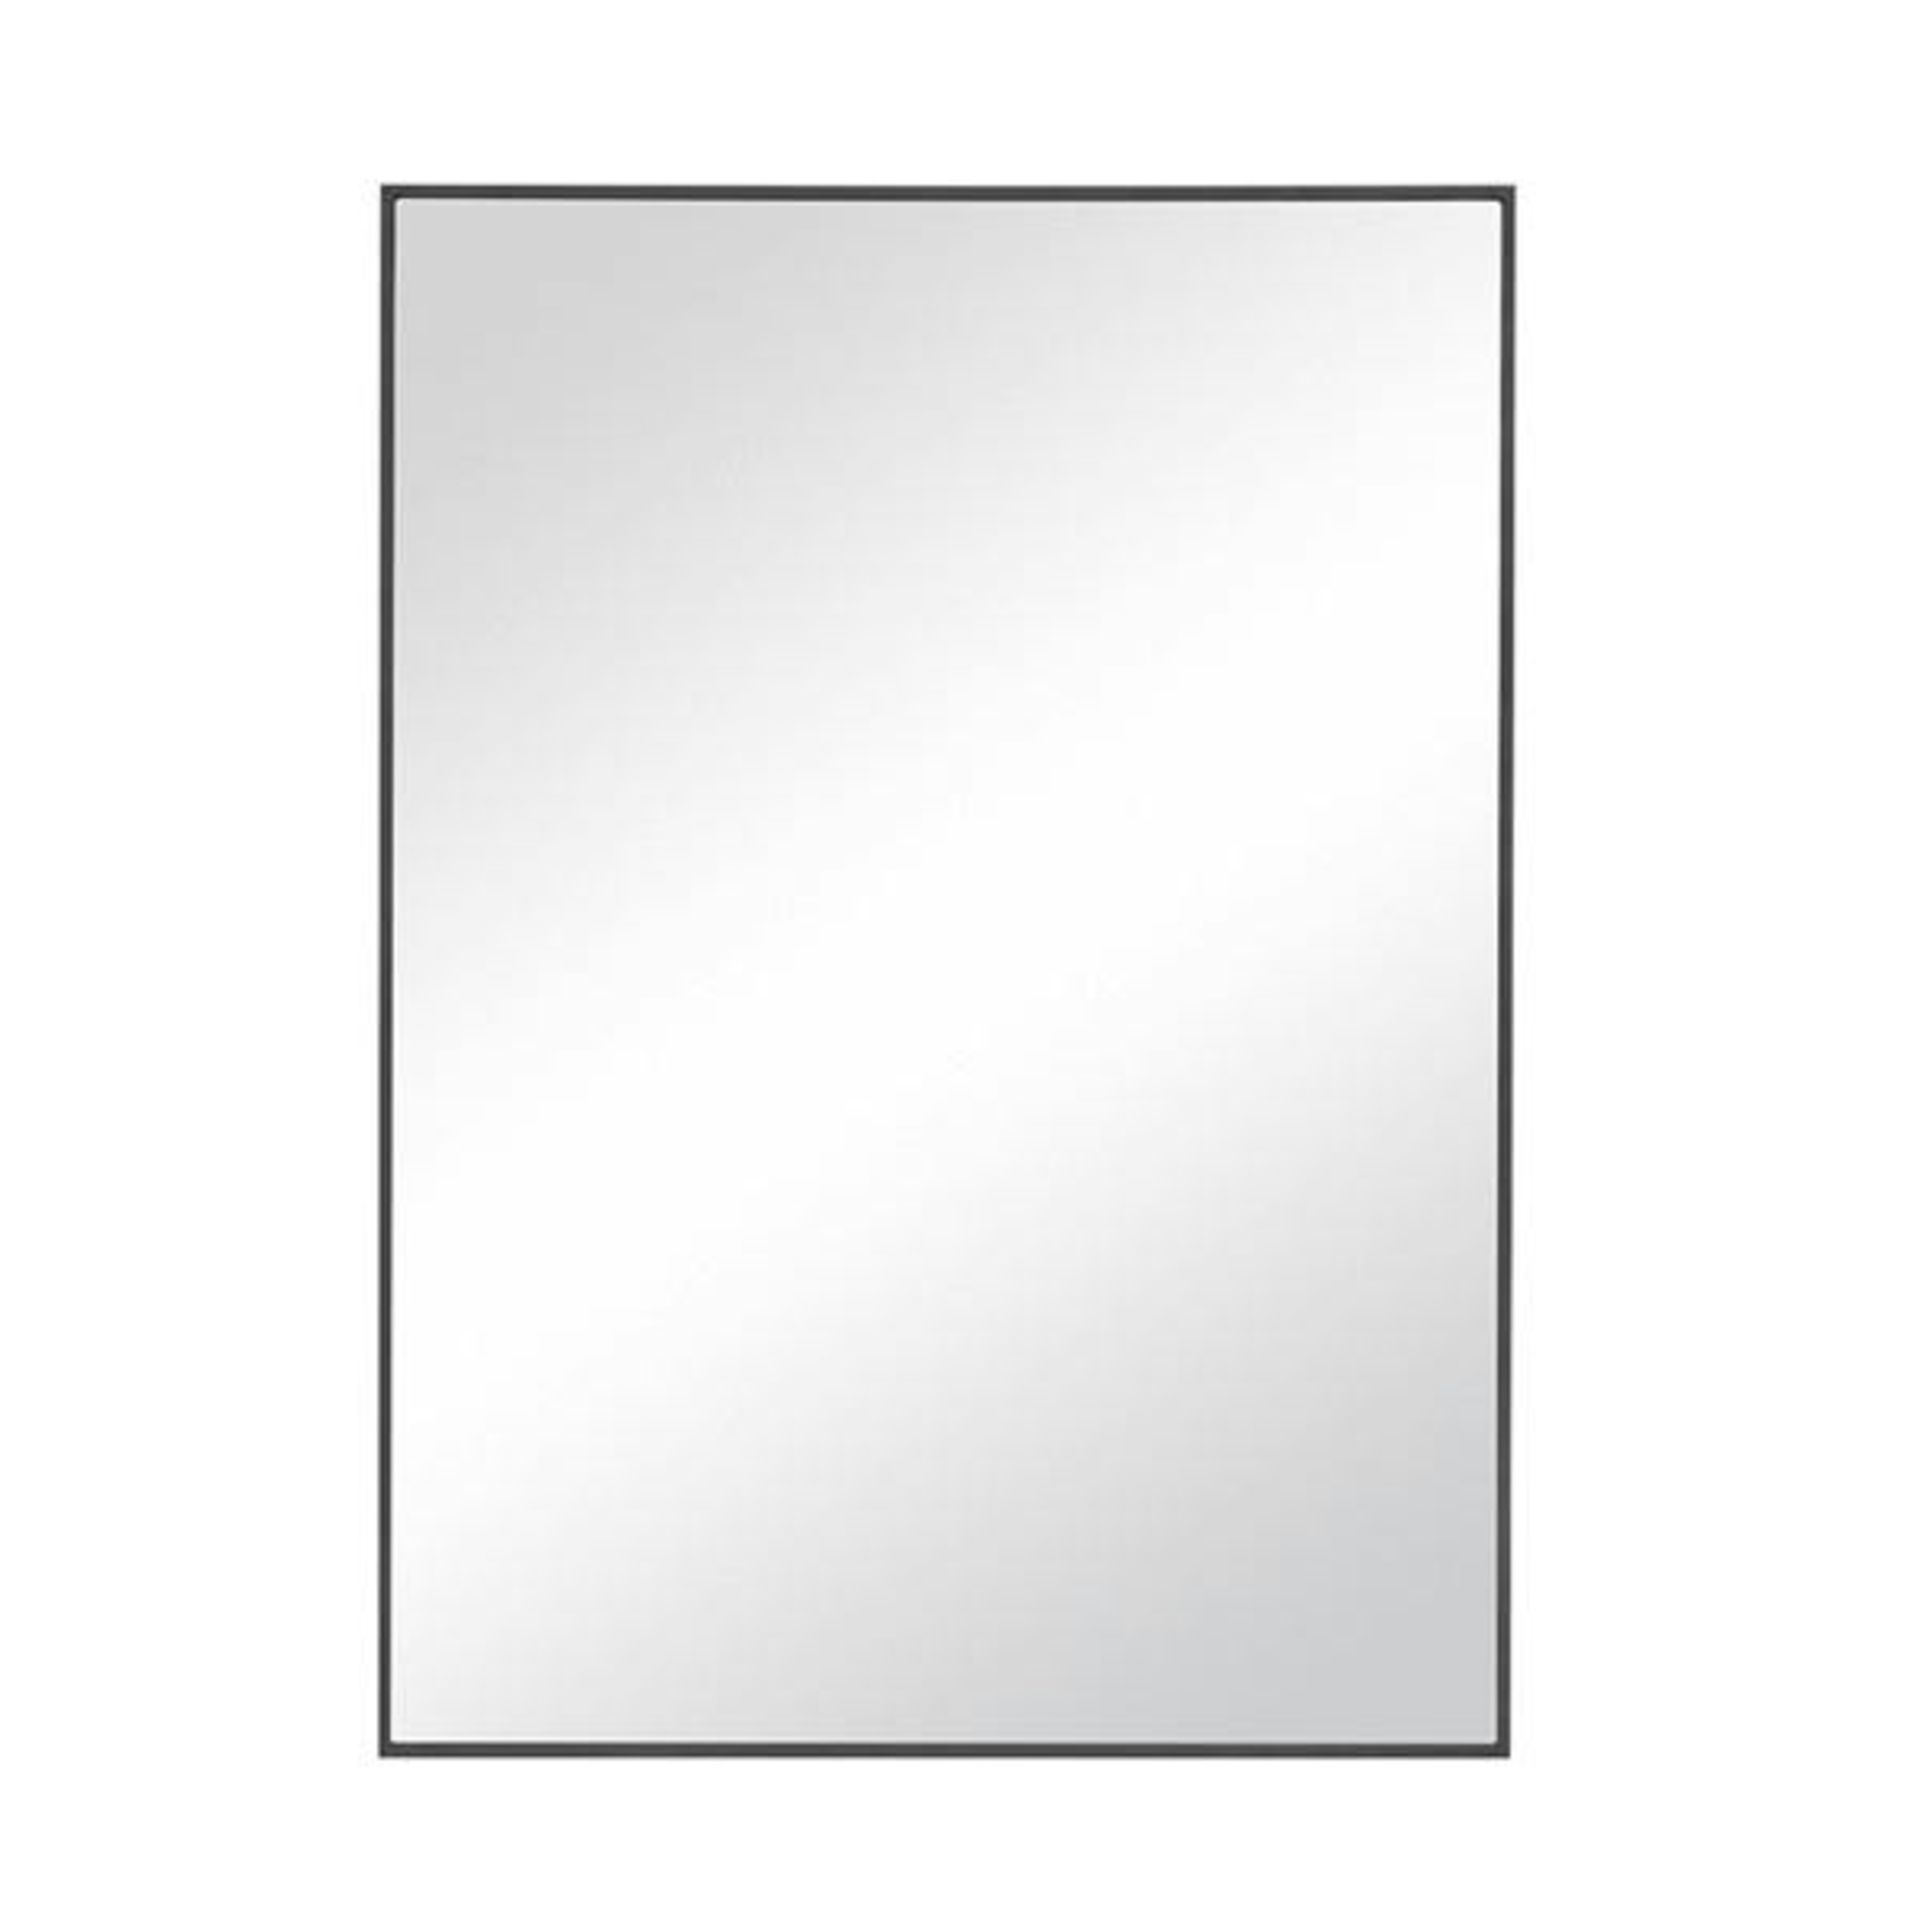 Foxcote Rectangle Mirror (110 x 80cm) RRP 199 About the Product(s) Hanging this minimalist mirror on - Image 2 of 2